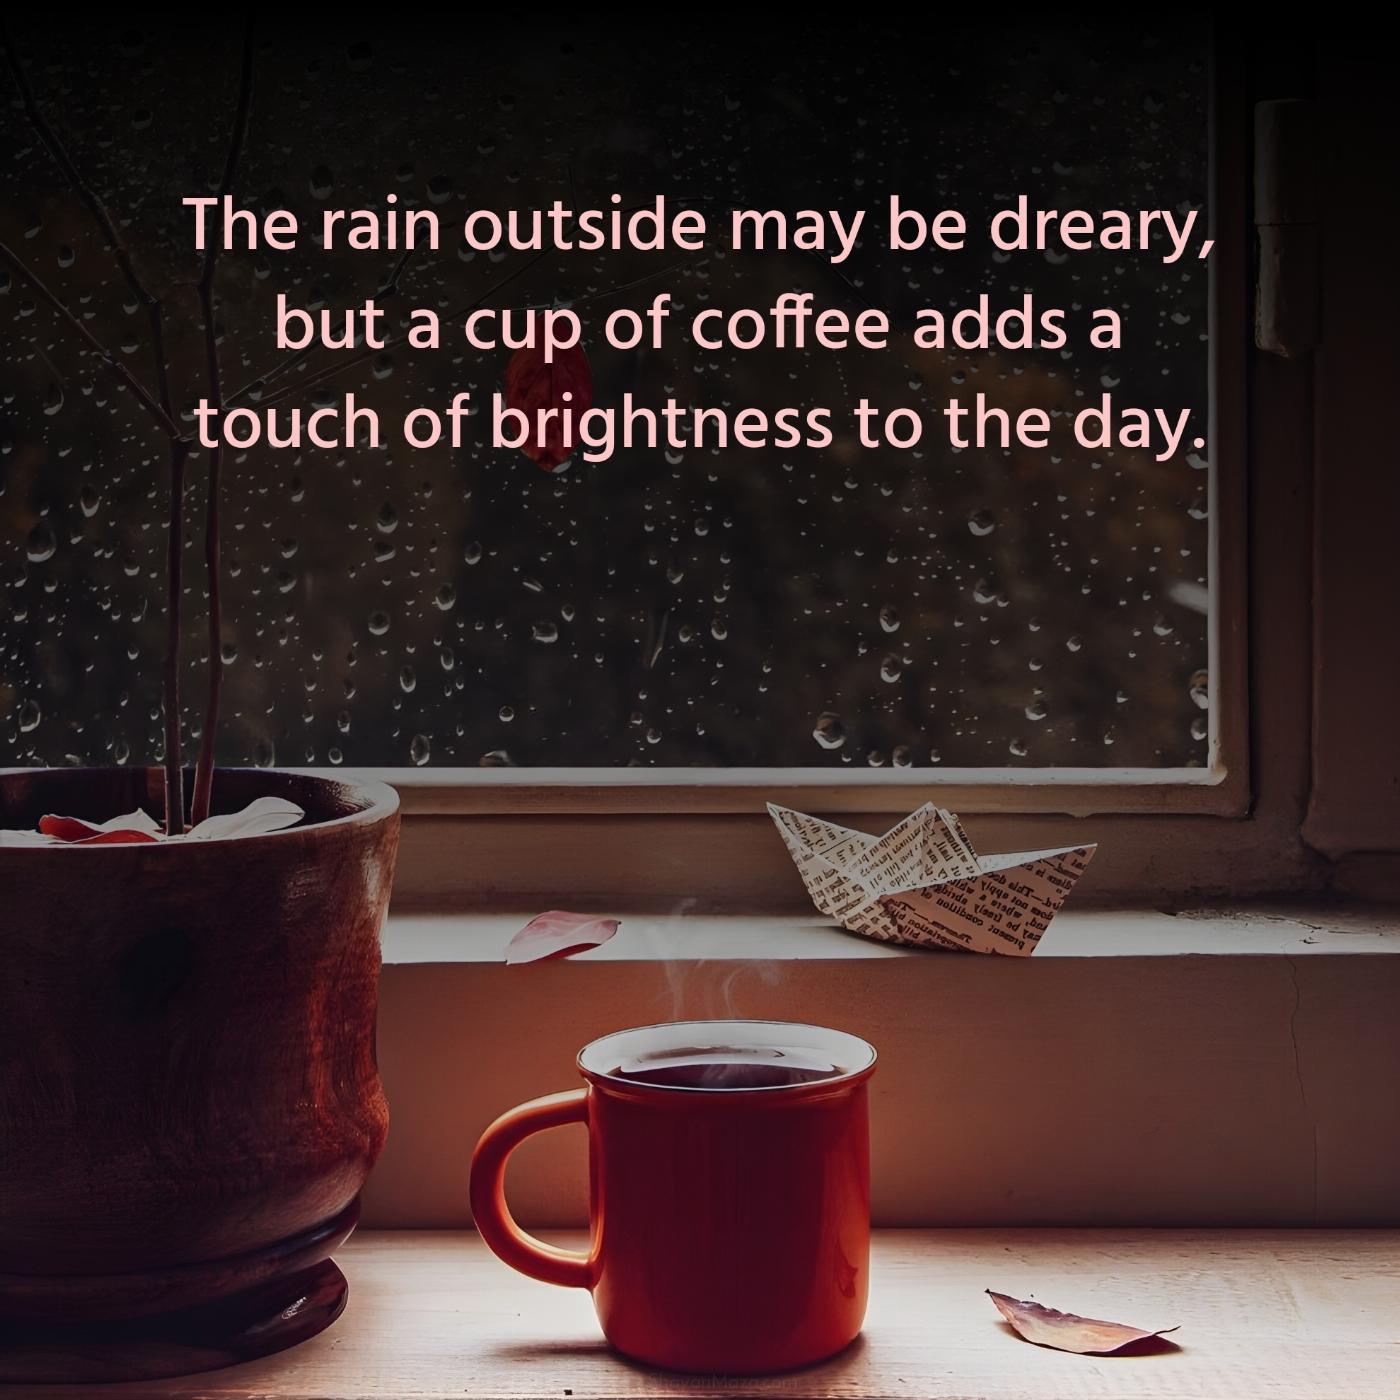 The rain outside may be dreary but a cup of coffee adds a touch of brightness